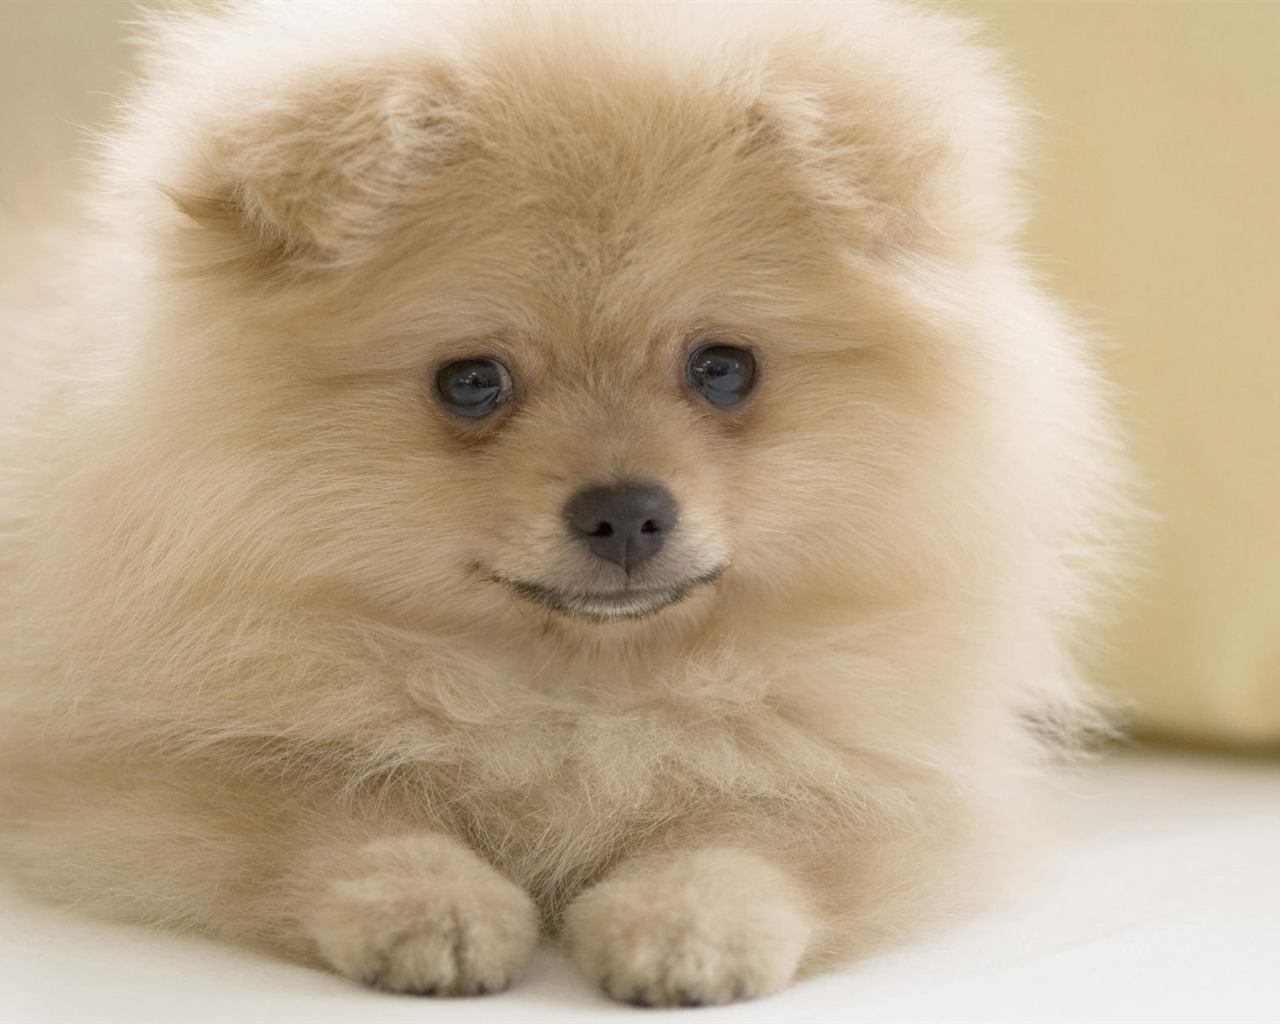 Puppy Photo HD wallpapers (10) #12 - 1280x1024